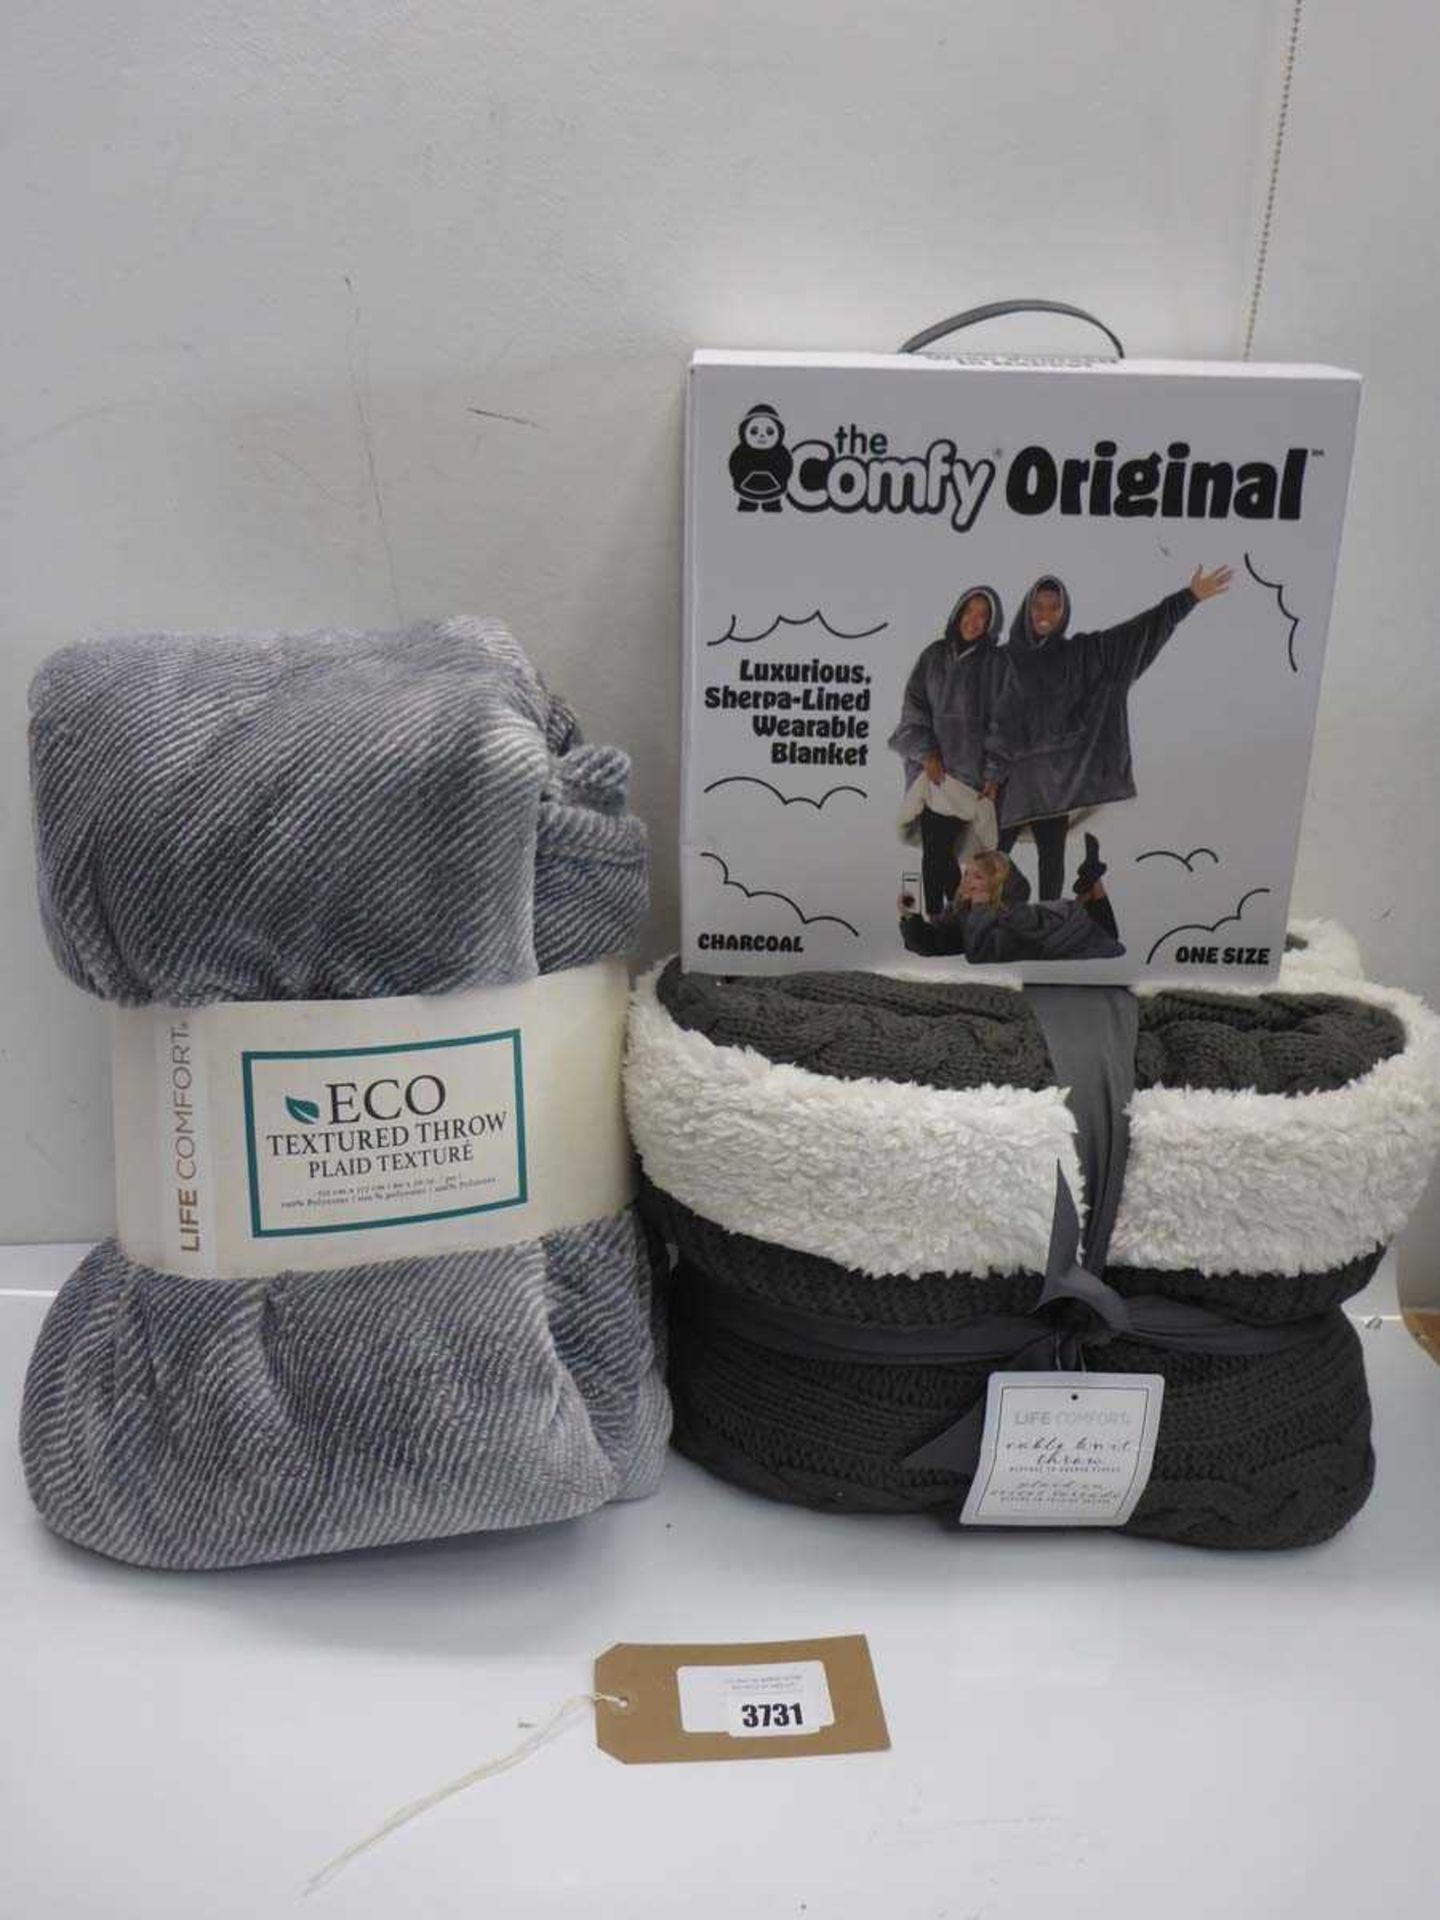 +VAT Large textured throw, Cable knit throw and The comfy original Sherpa lined wearable blanket